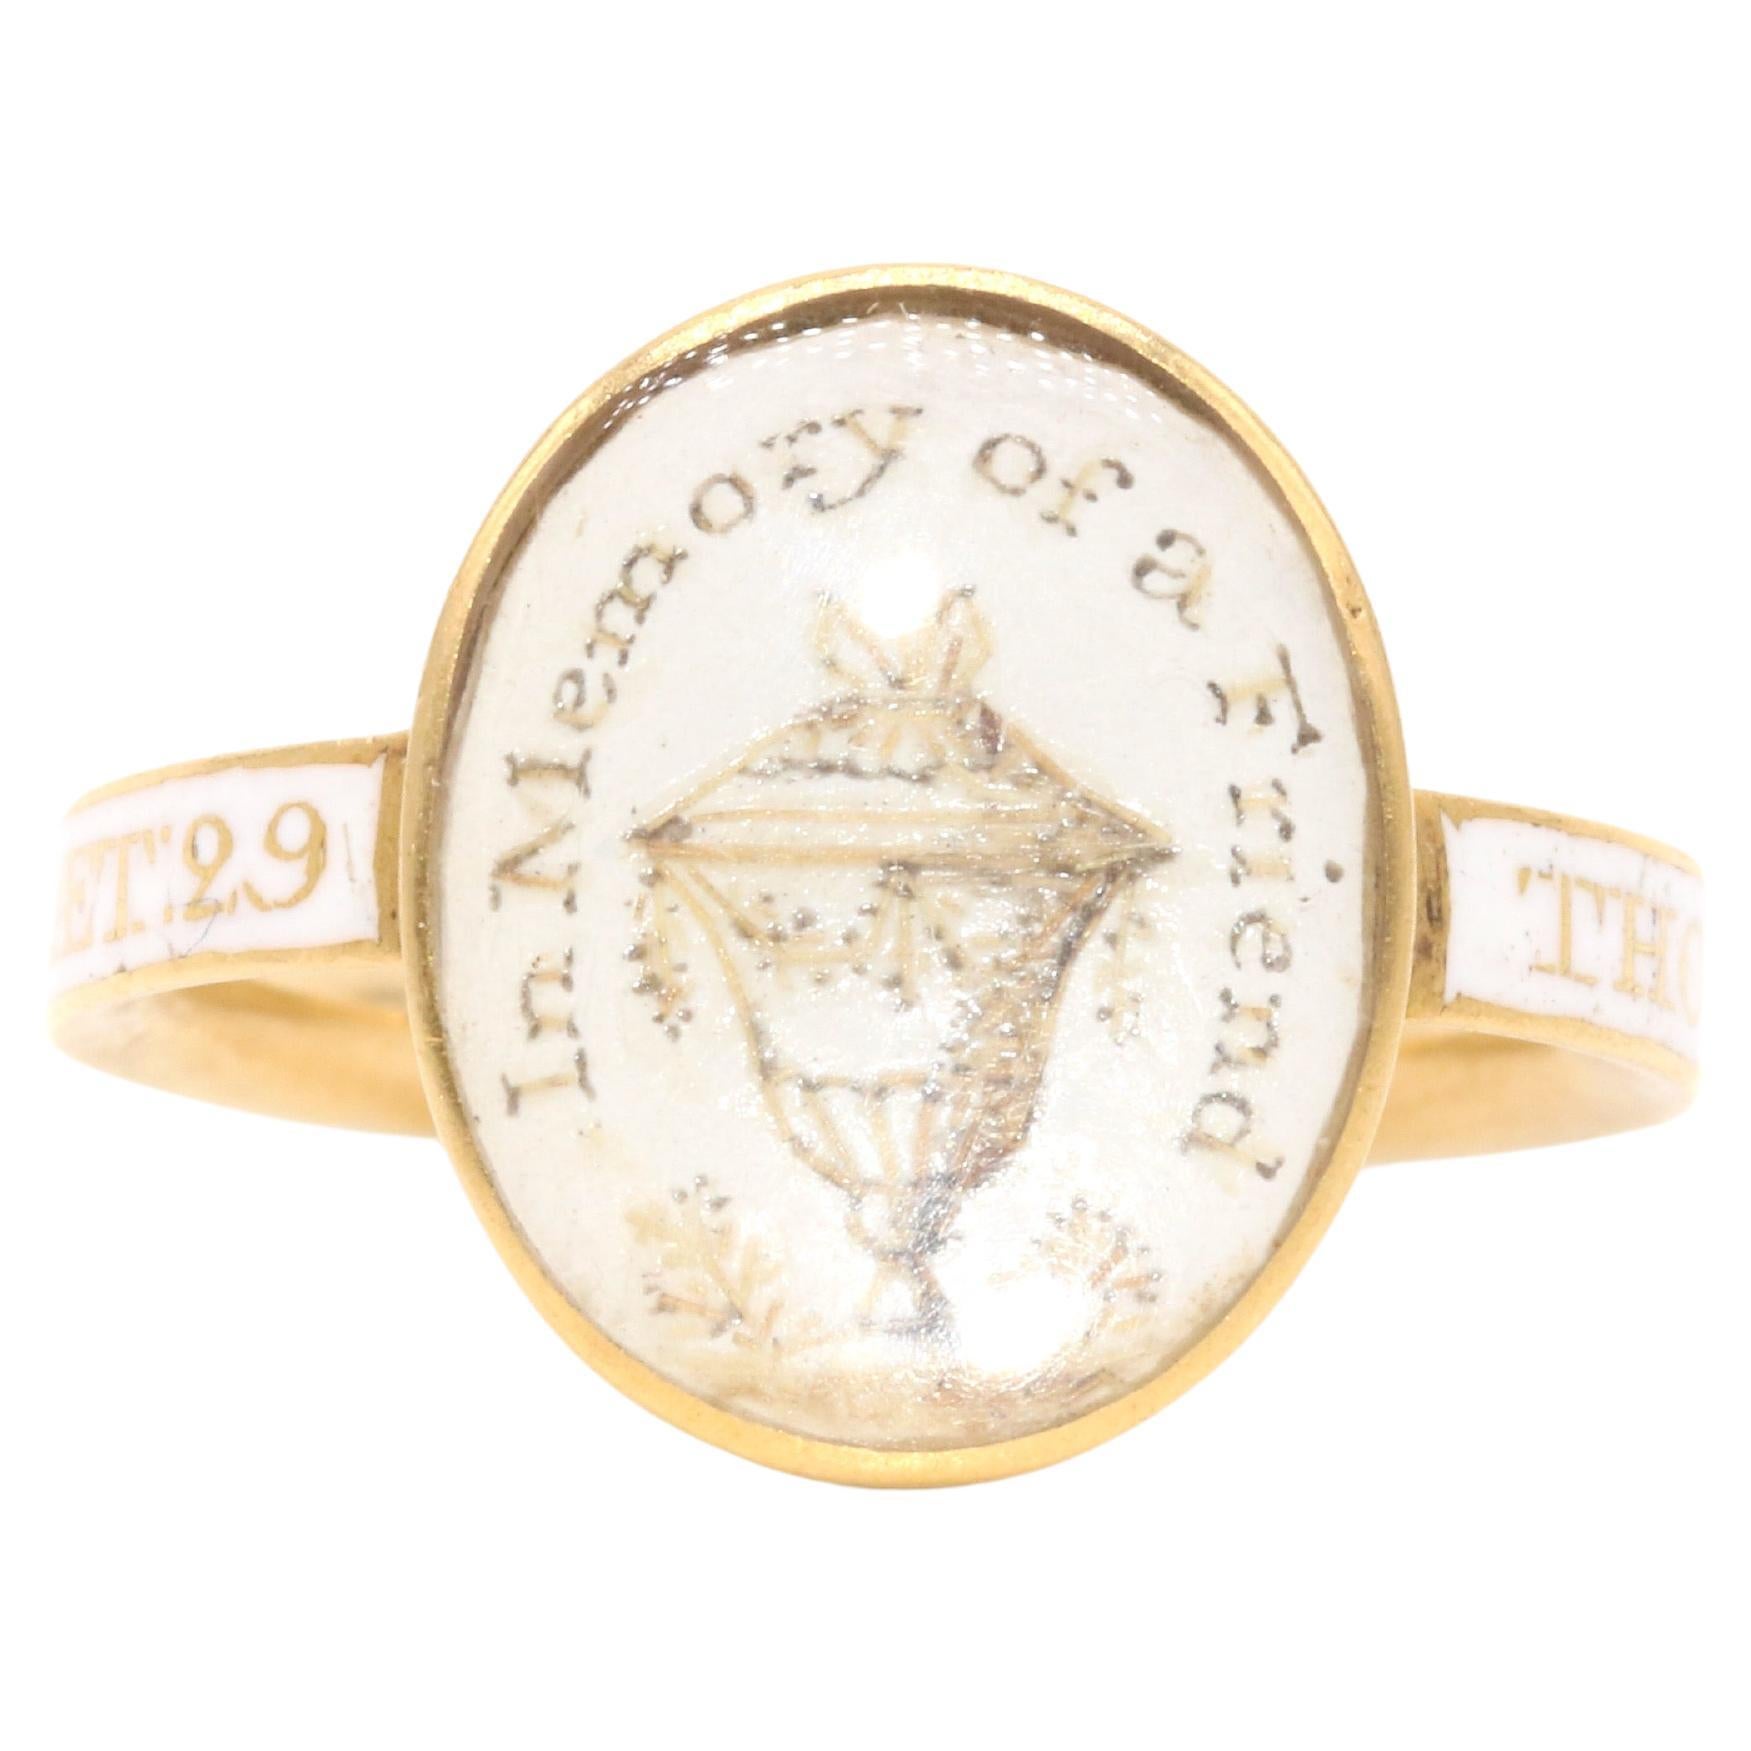 Georgian 1770s 18K Gold White Enamel Urn “In Memory of a Friend” Mourning Ring For Sale